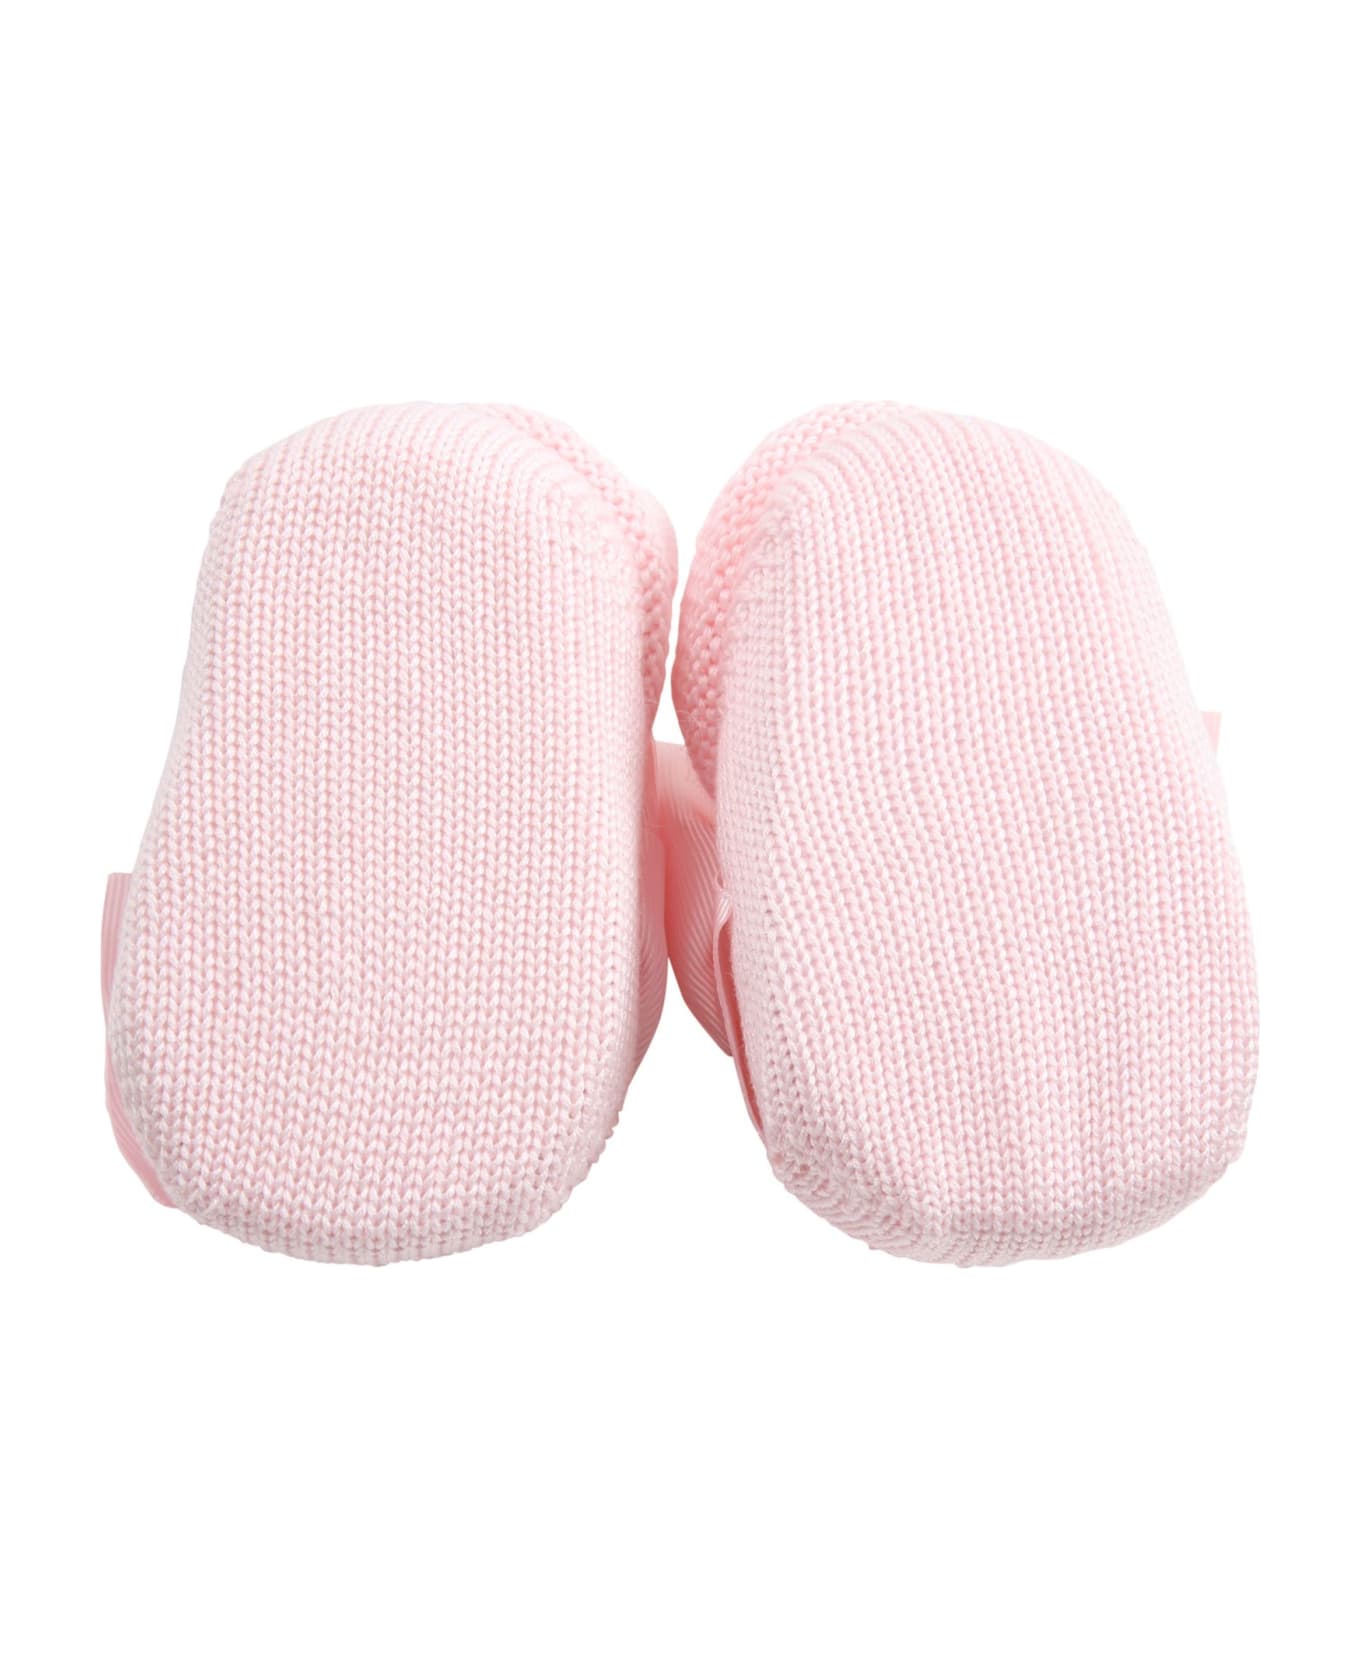 Story Loris Pink Baby Bootee For Babygirl - Pink アクセサリー＆ギフト